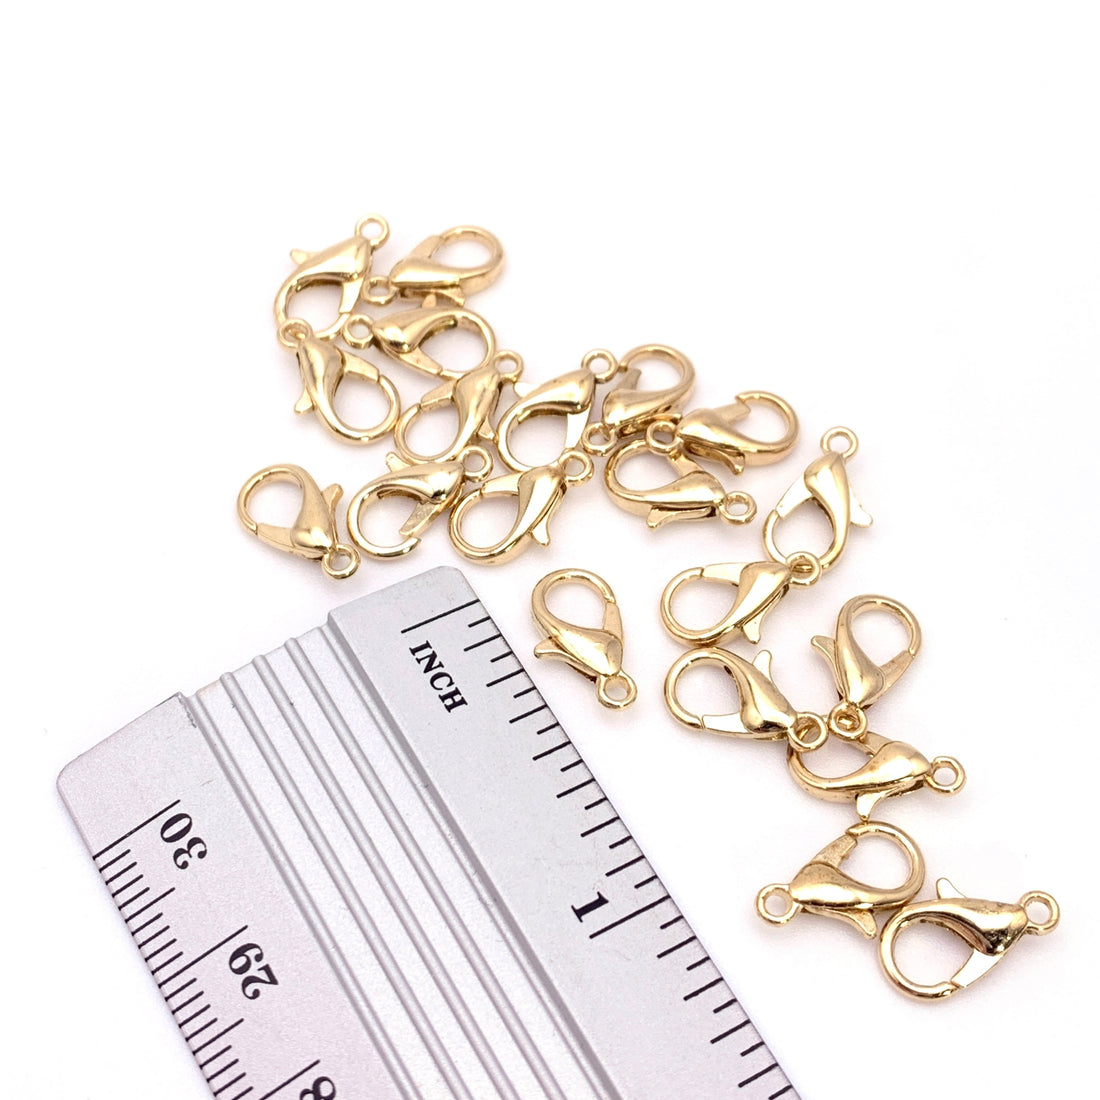 12x7mm Lobster Claw Clasp Findings, Golden Colour - 20 Pack – Easy